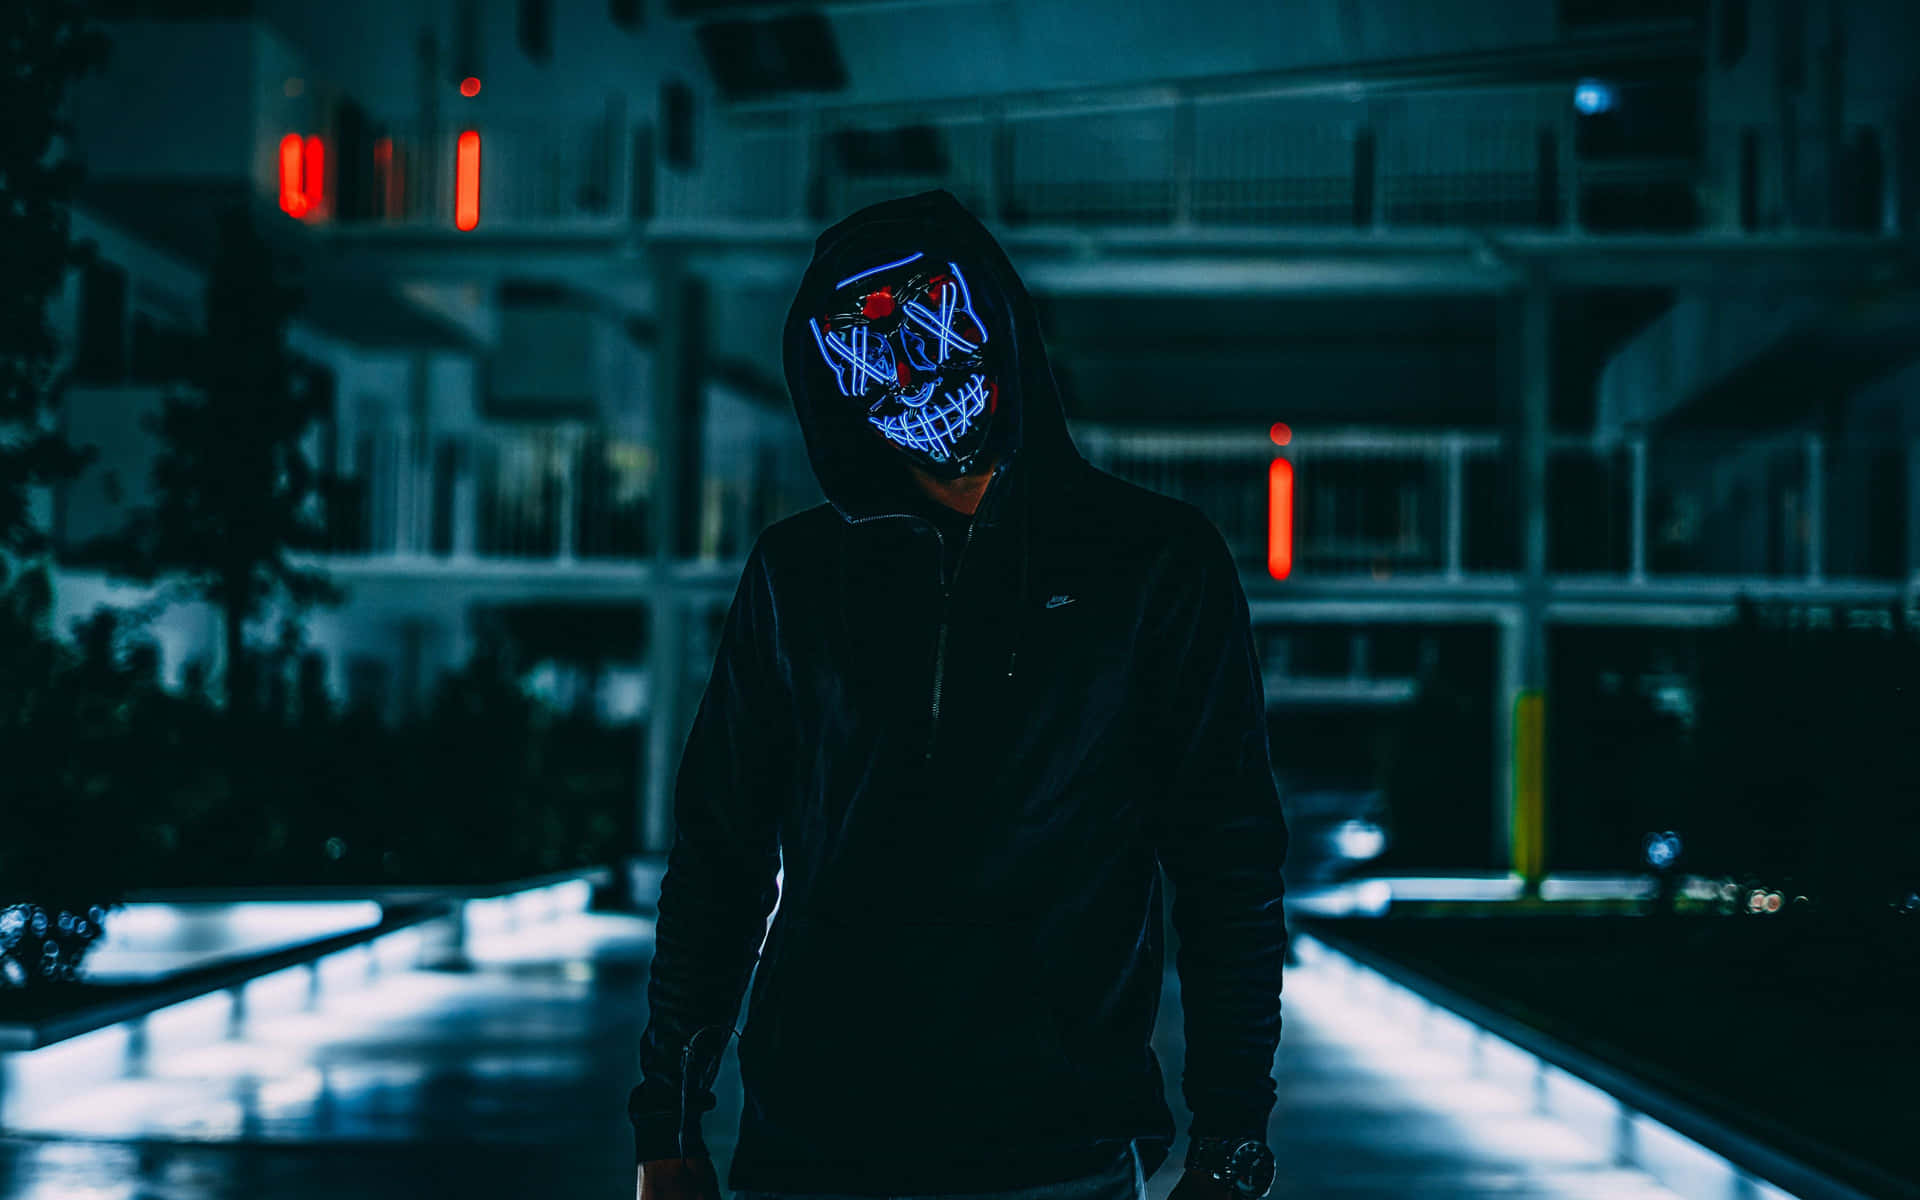 Look beautiful and stand out with Neon Mask! Wallpaper